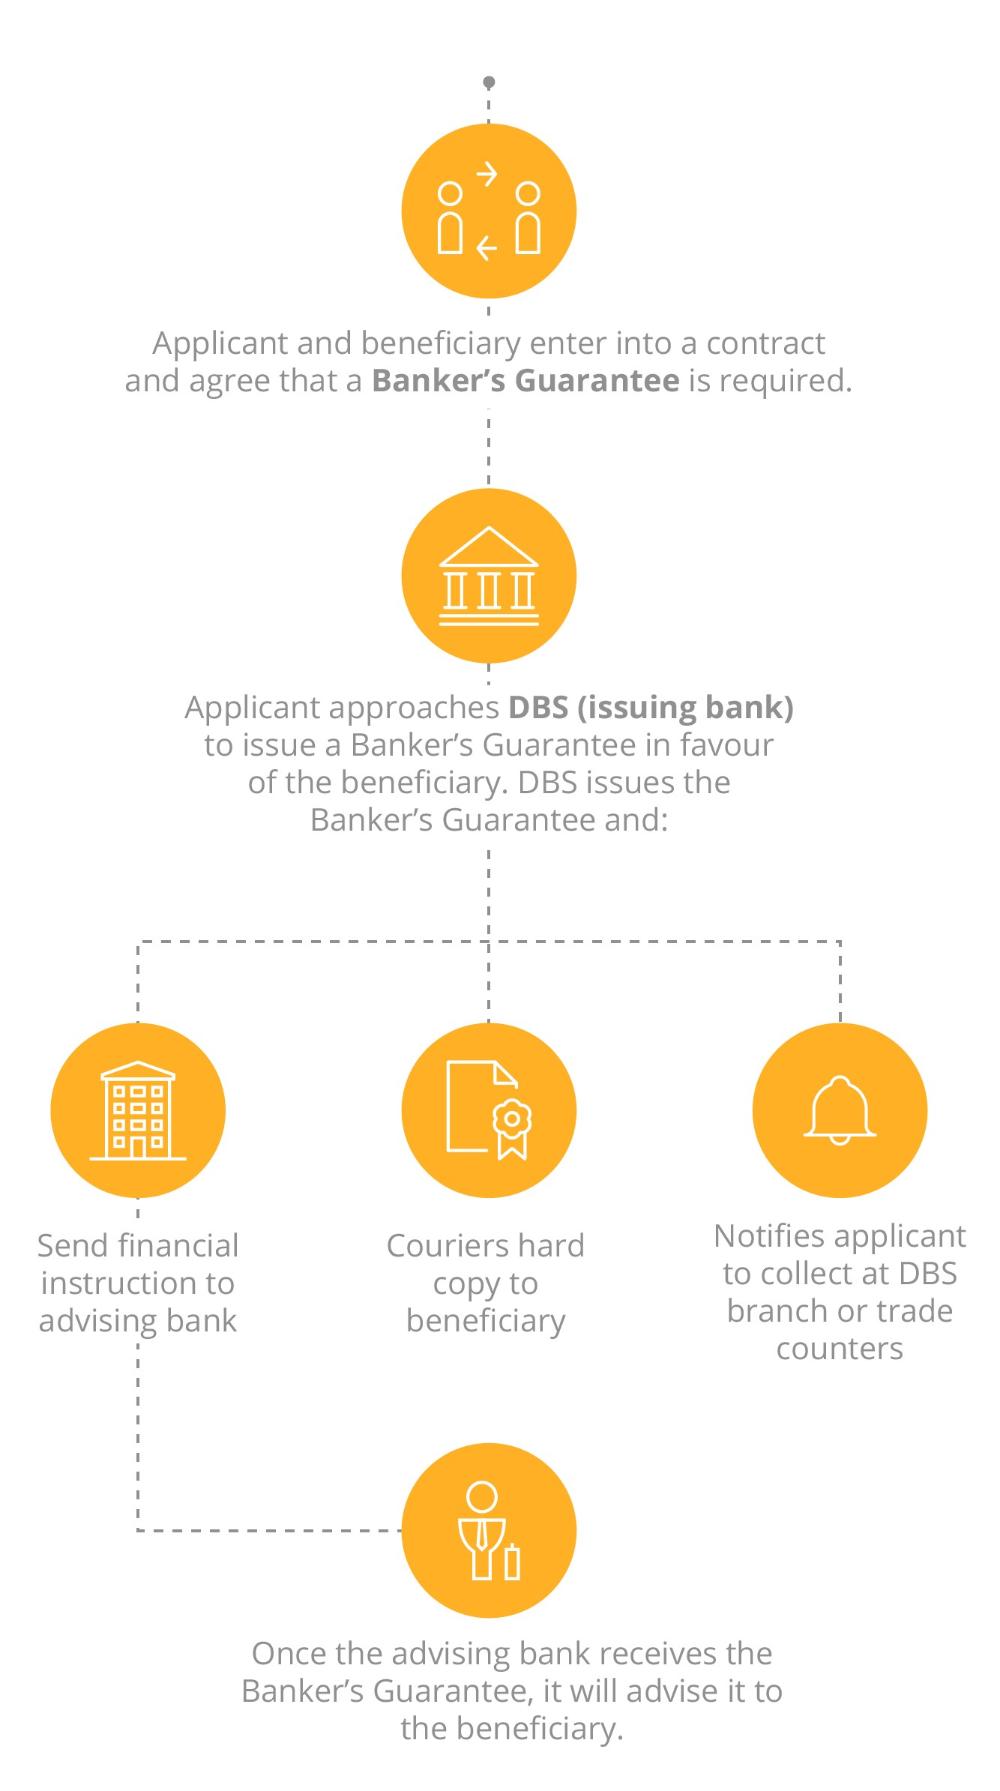 Flowchart on how to apply for DBS Banker’s Guarantee / Standby Letter of Credit (SBLC)